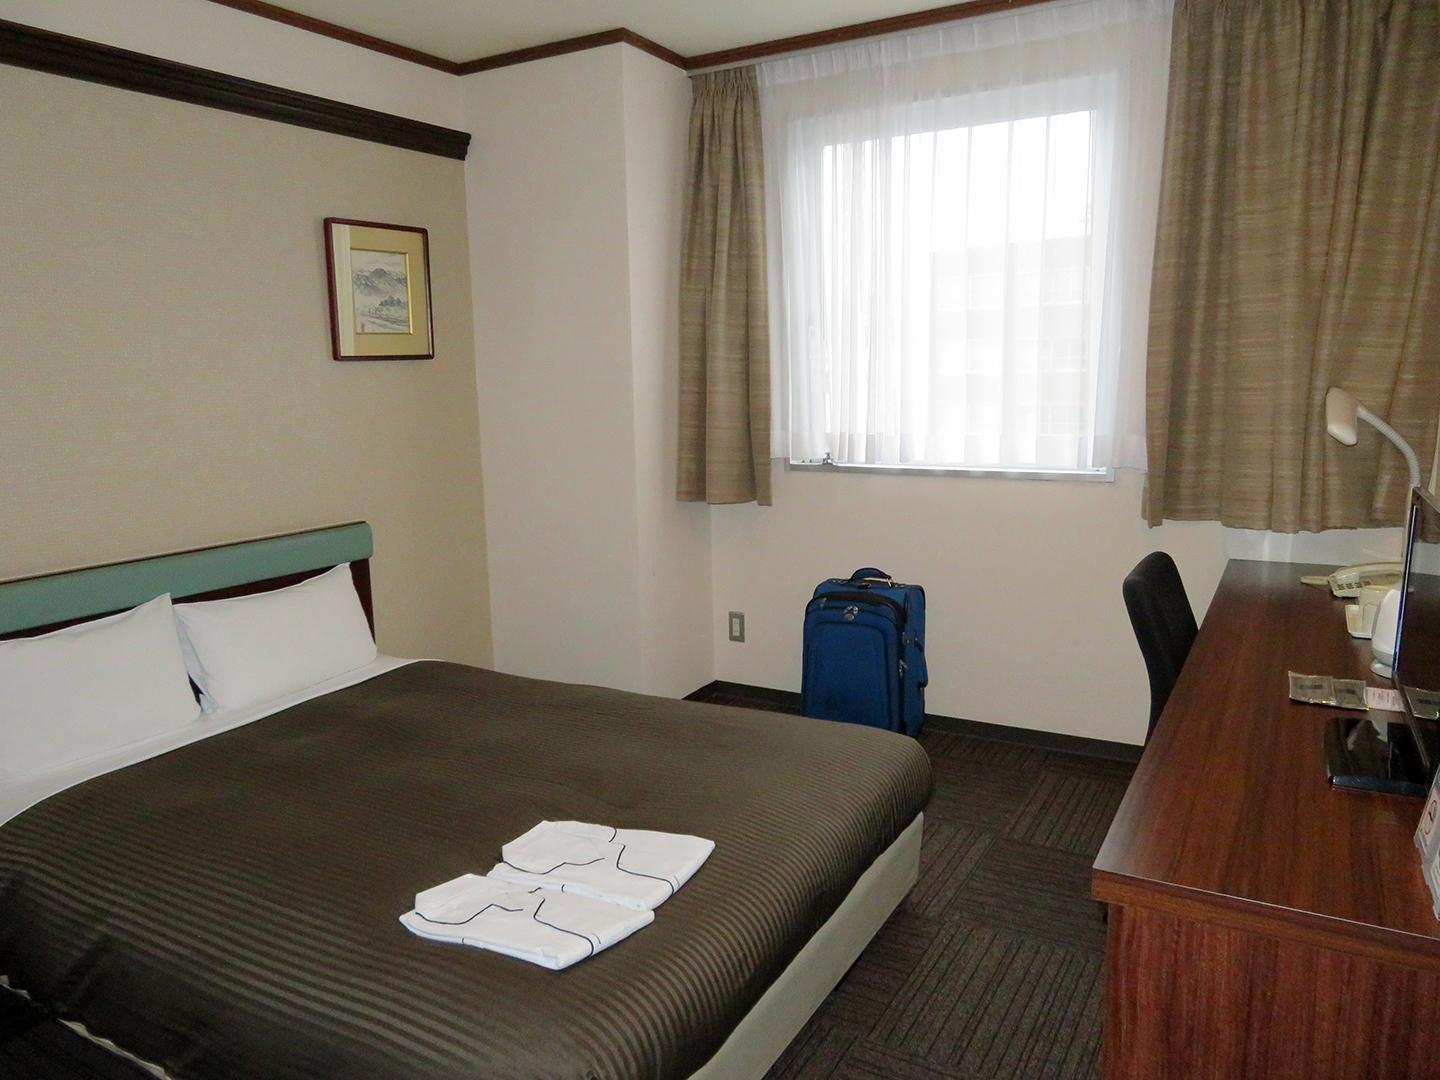 Overview of double room at Hotel Matsumoto Yorozuya with bed to the left and desk to the right.